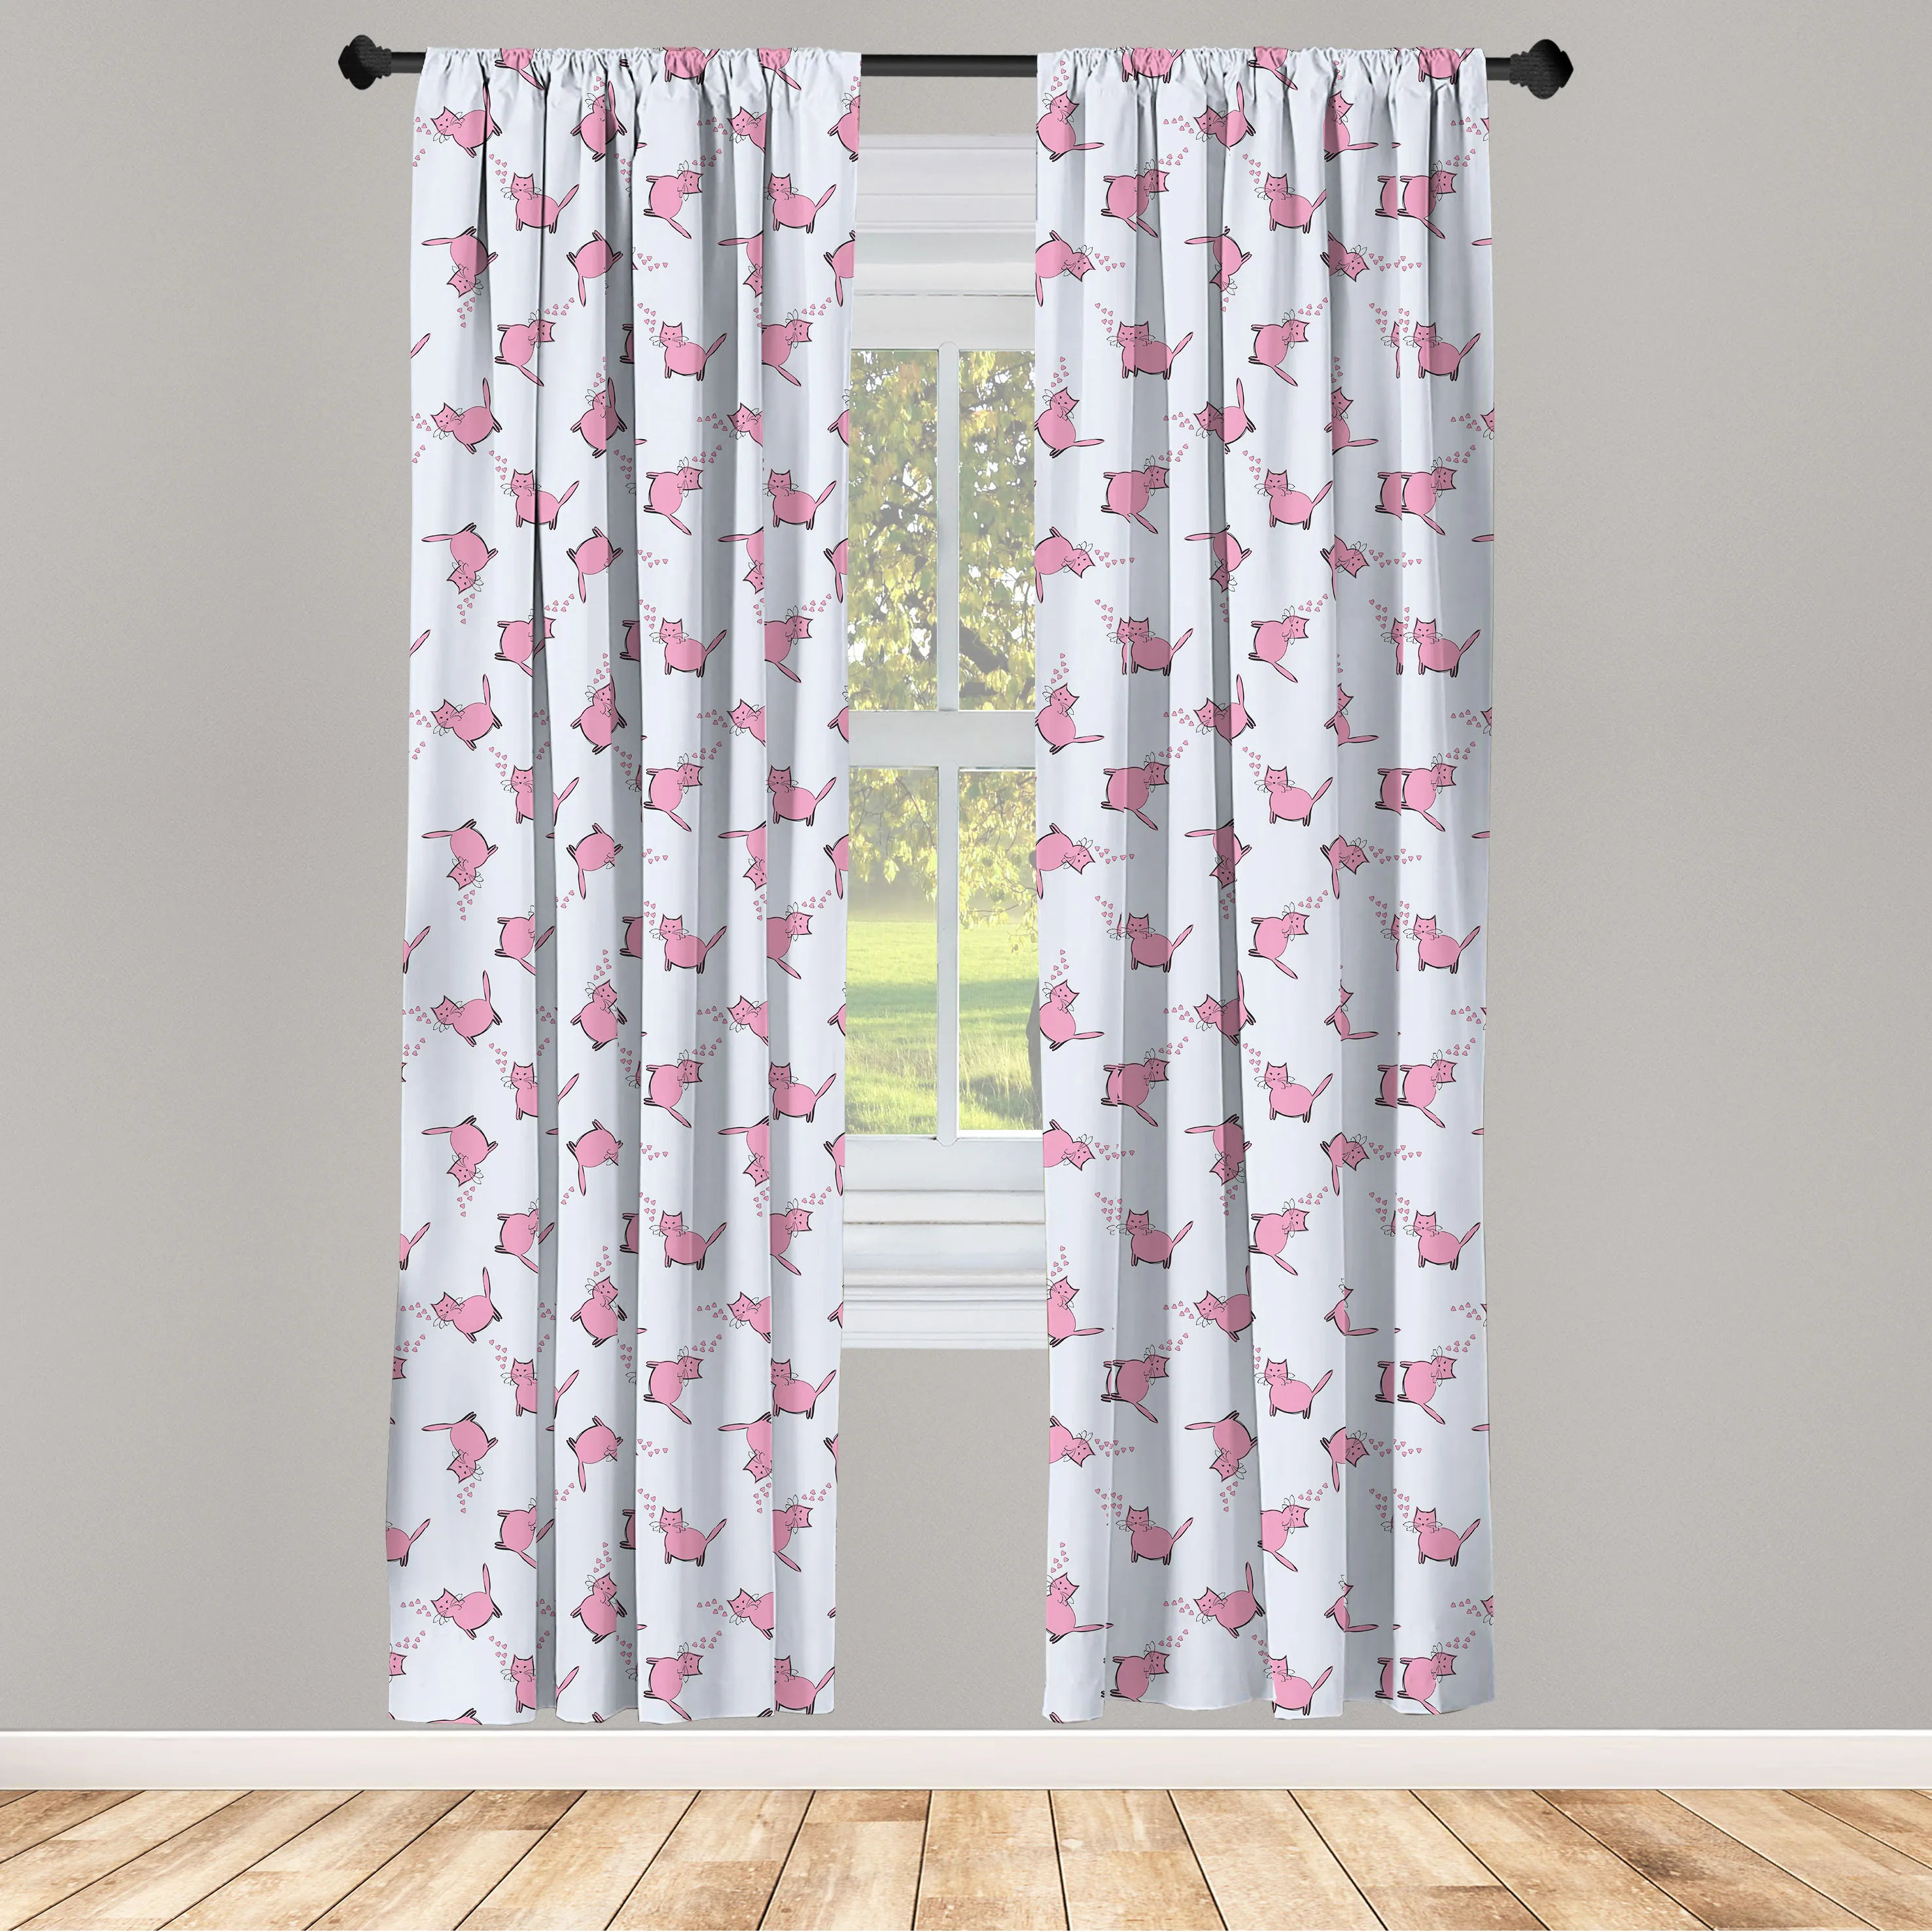 Polyester Door Curtain Beautiful Eyelet Wall Hanging Window Curtains Set Of  2 PC